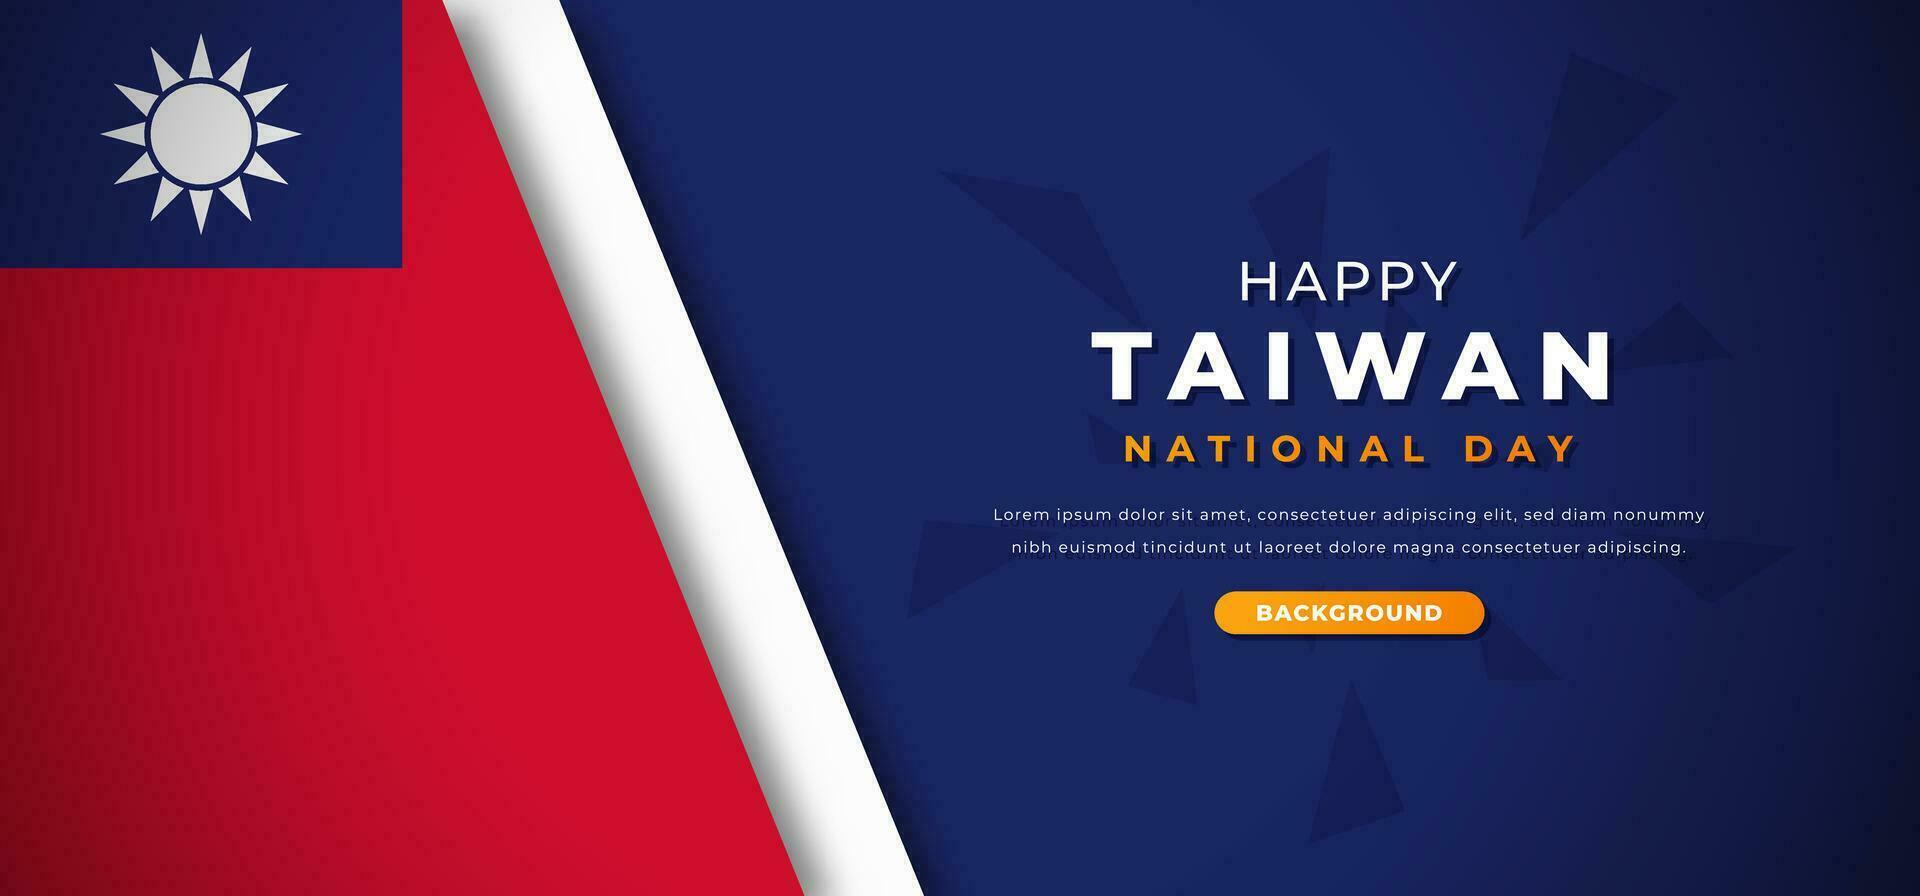 Happy Taiwan National Day Design Paper Cut Shapes Background Illustration for Poster, Banner, Advertising, Greeting Card vector